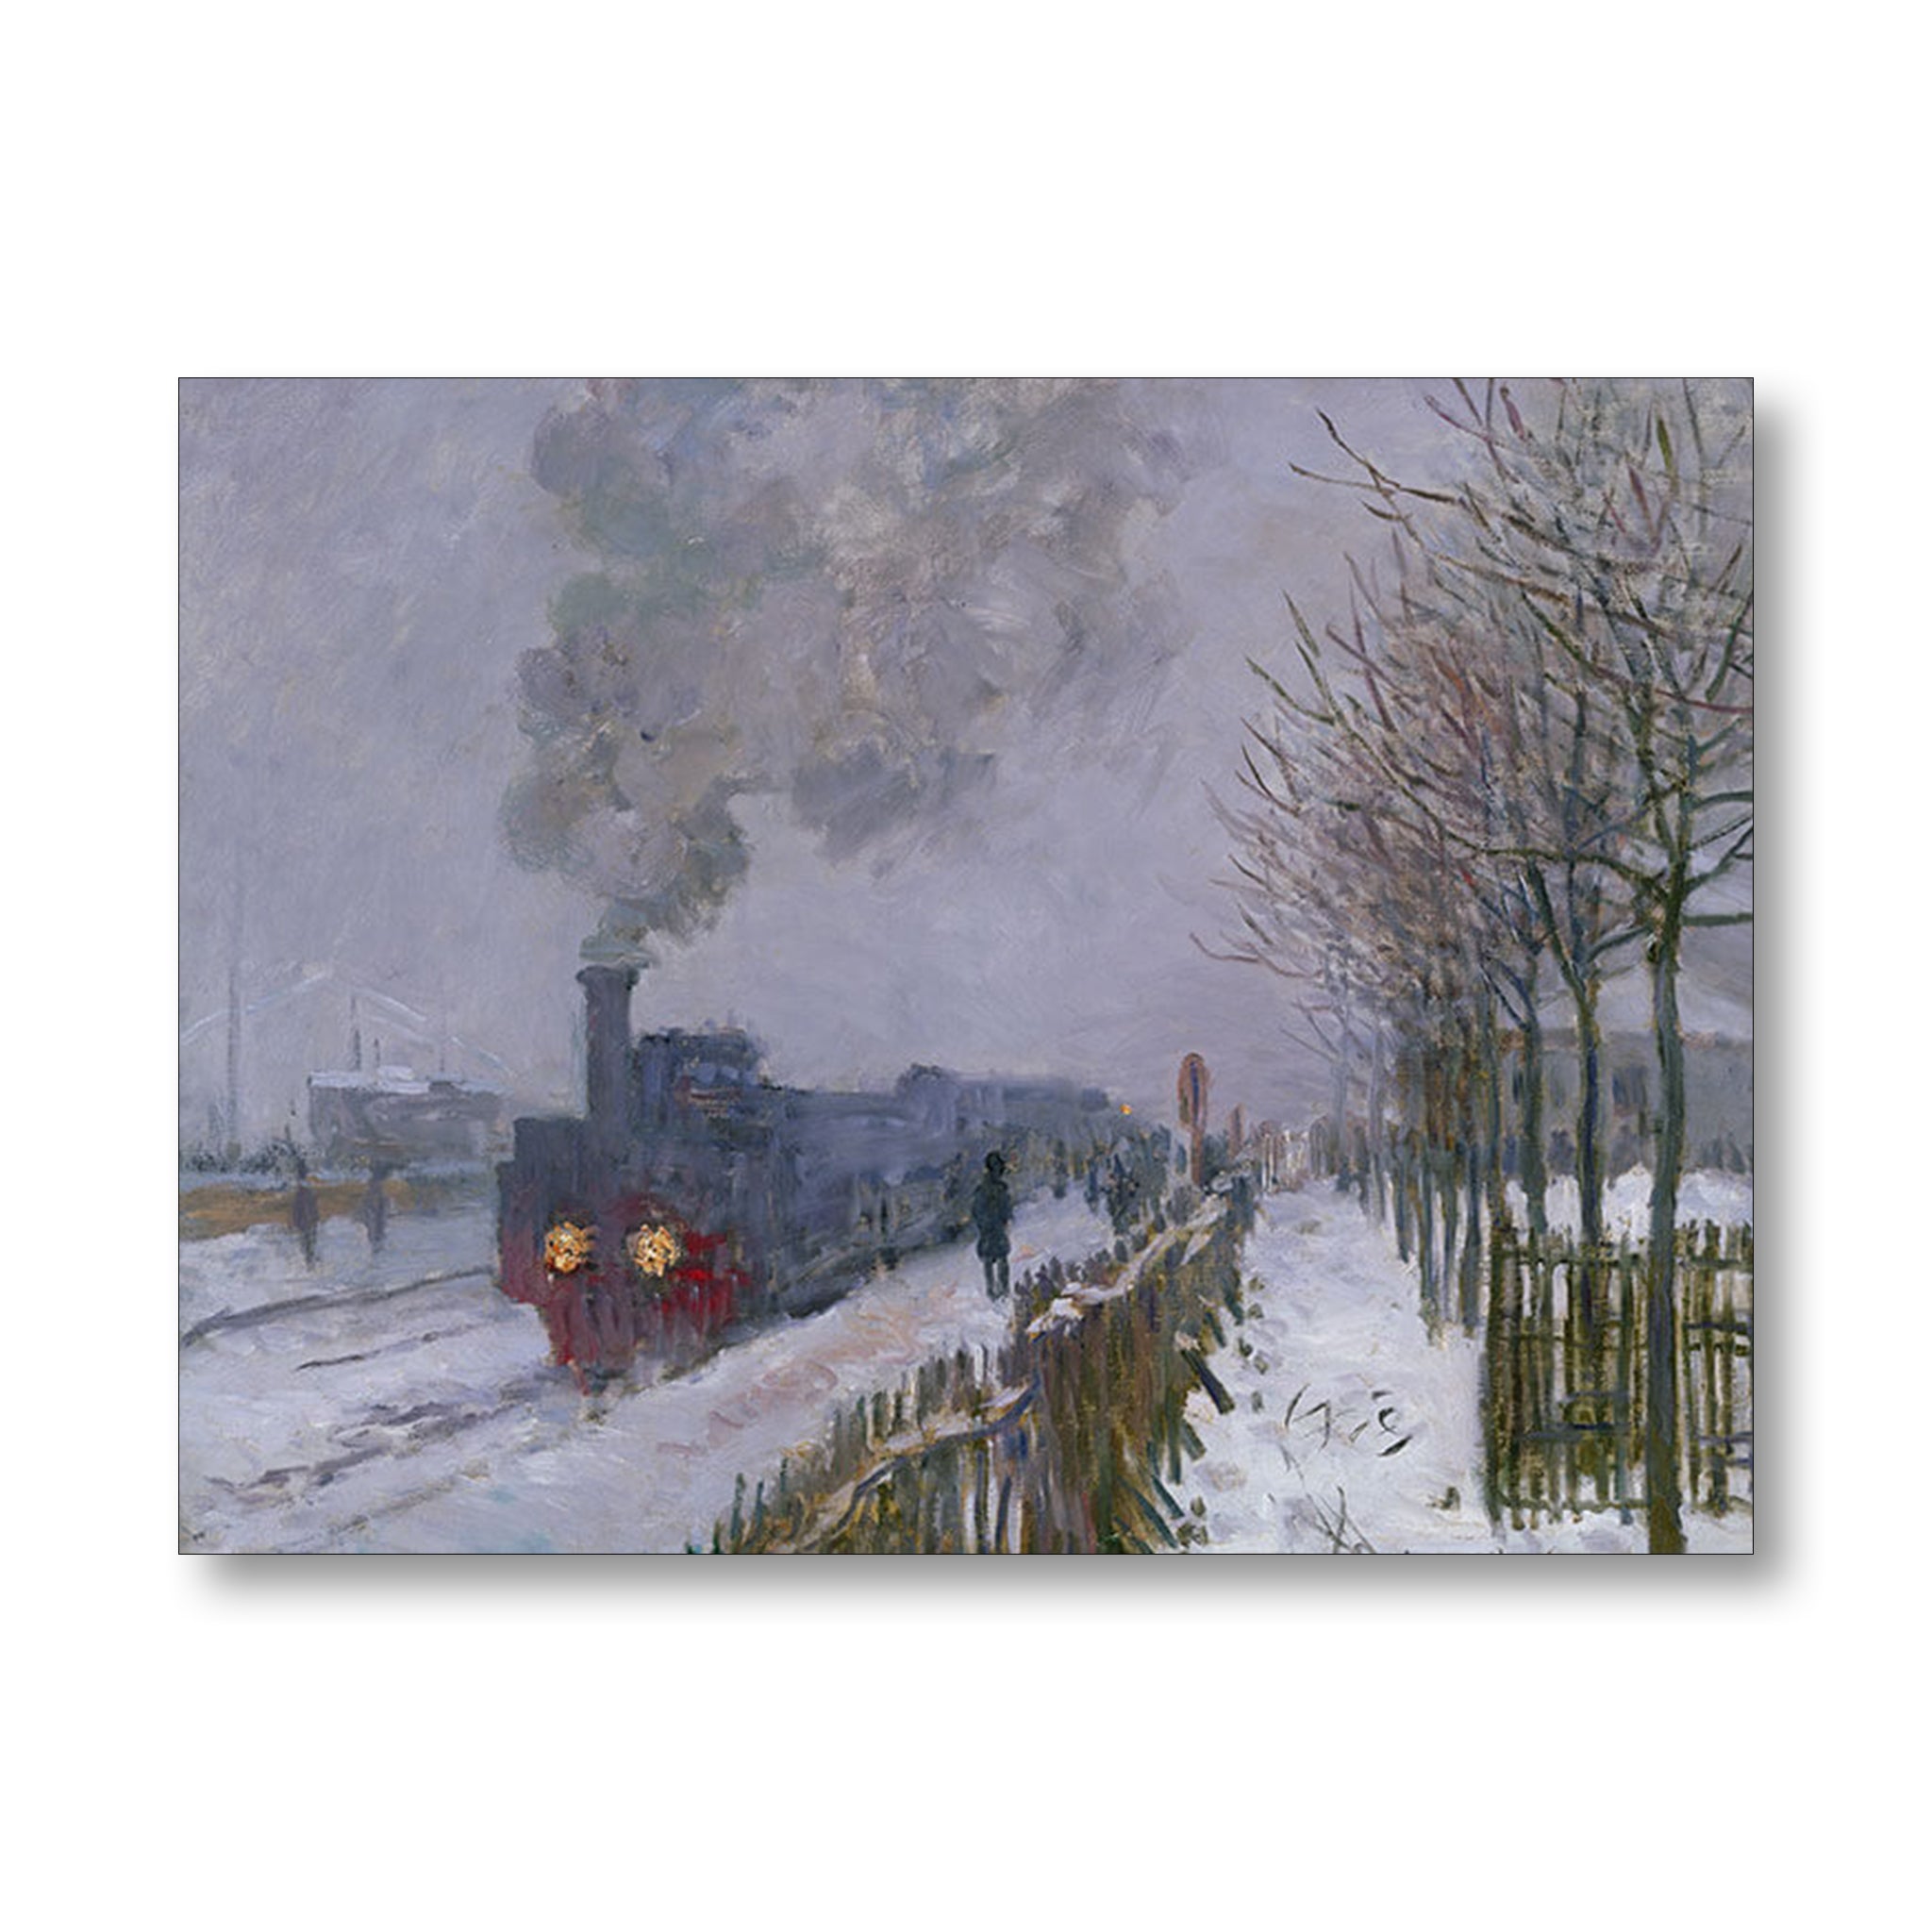 Christmas Card of train in the snow by Monet